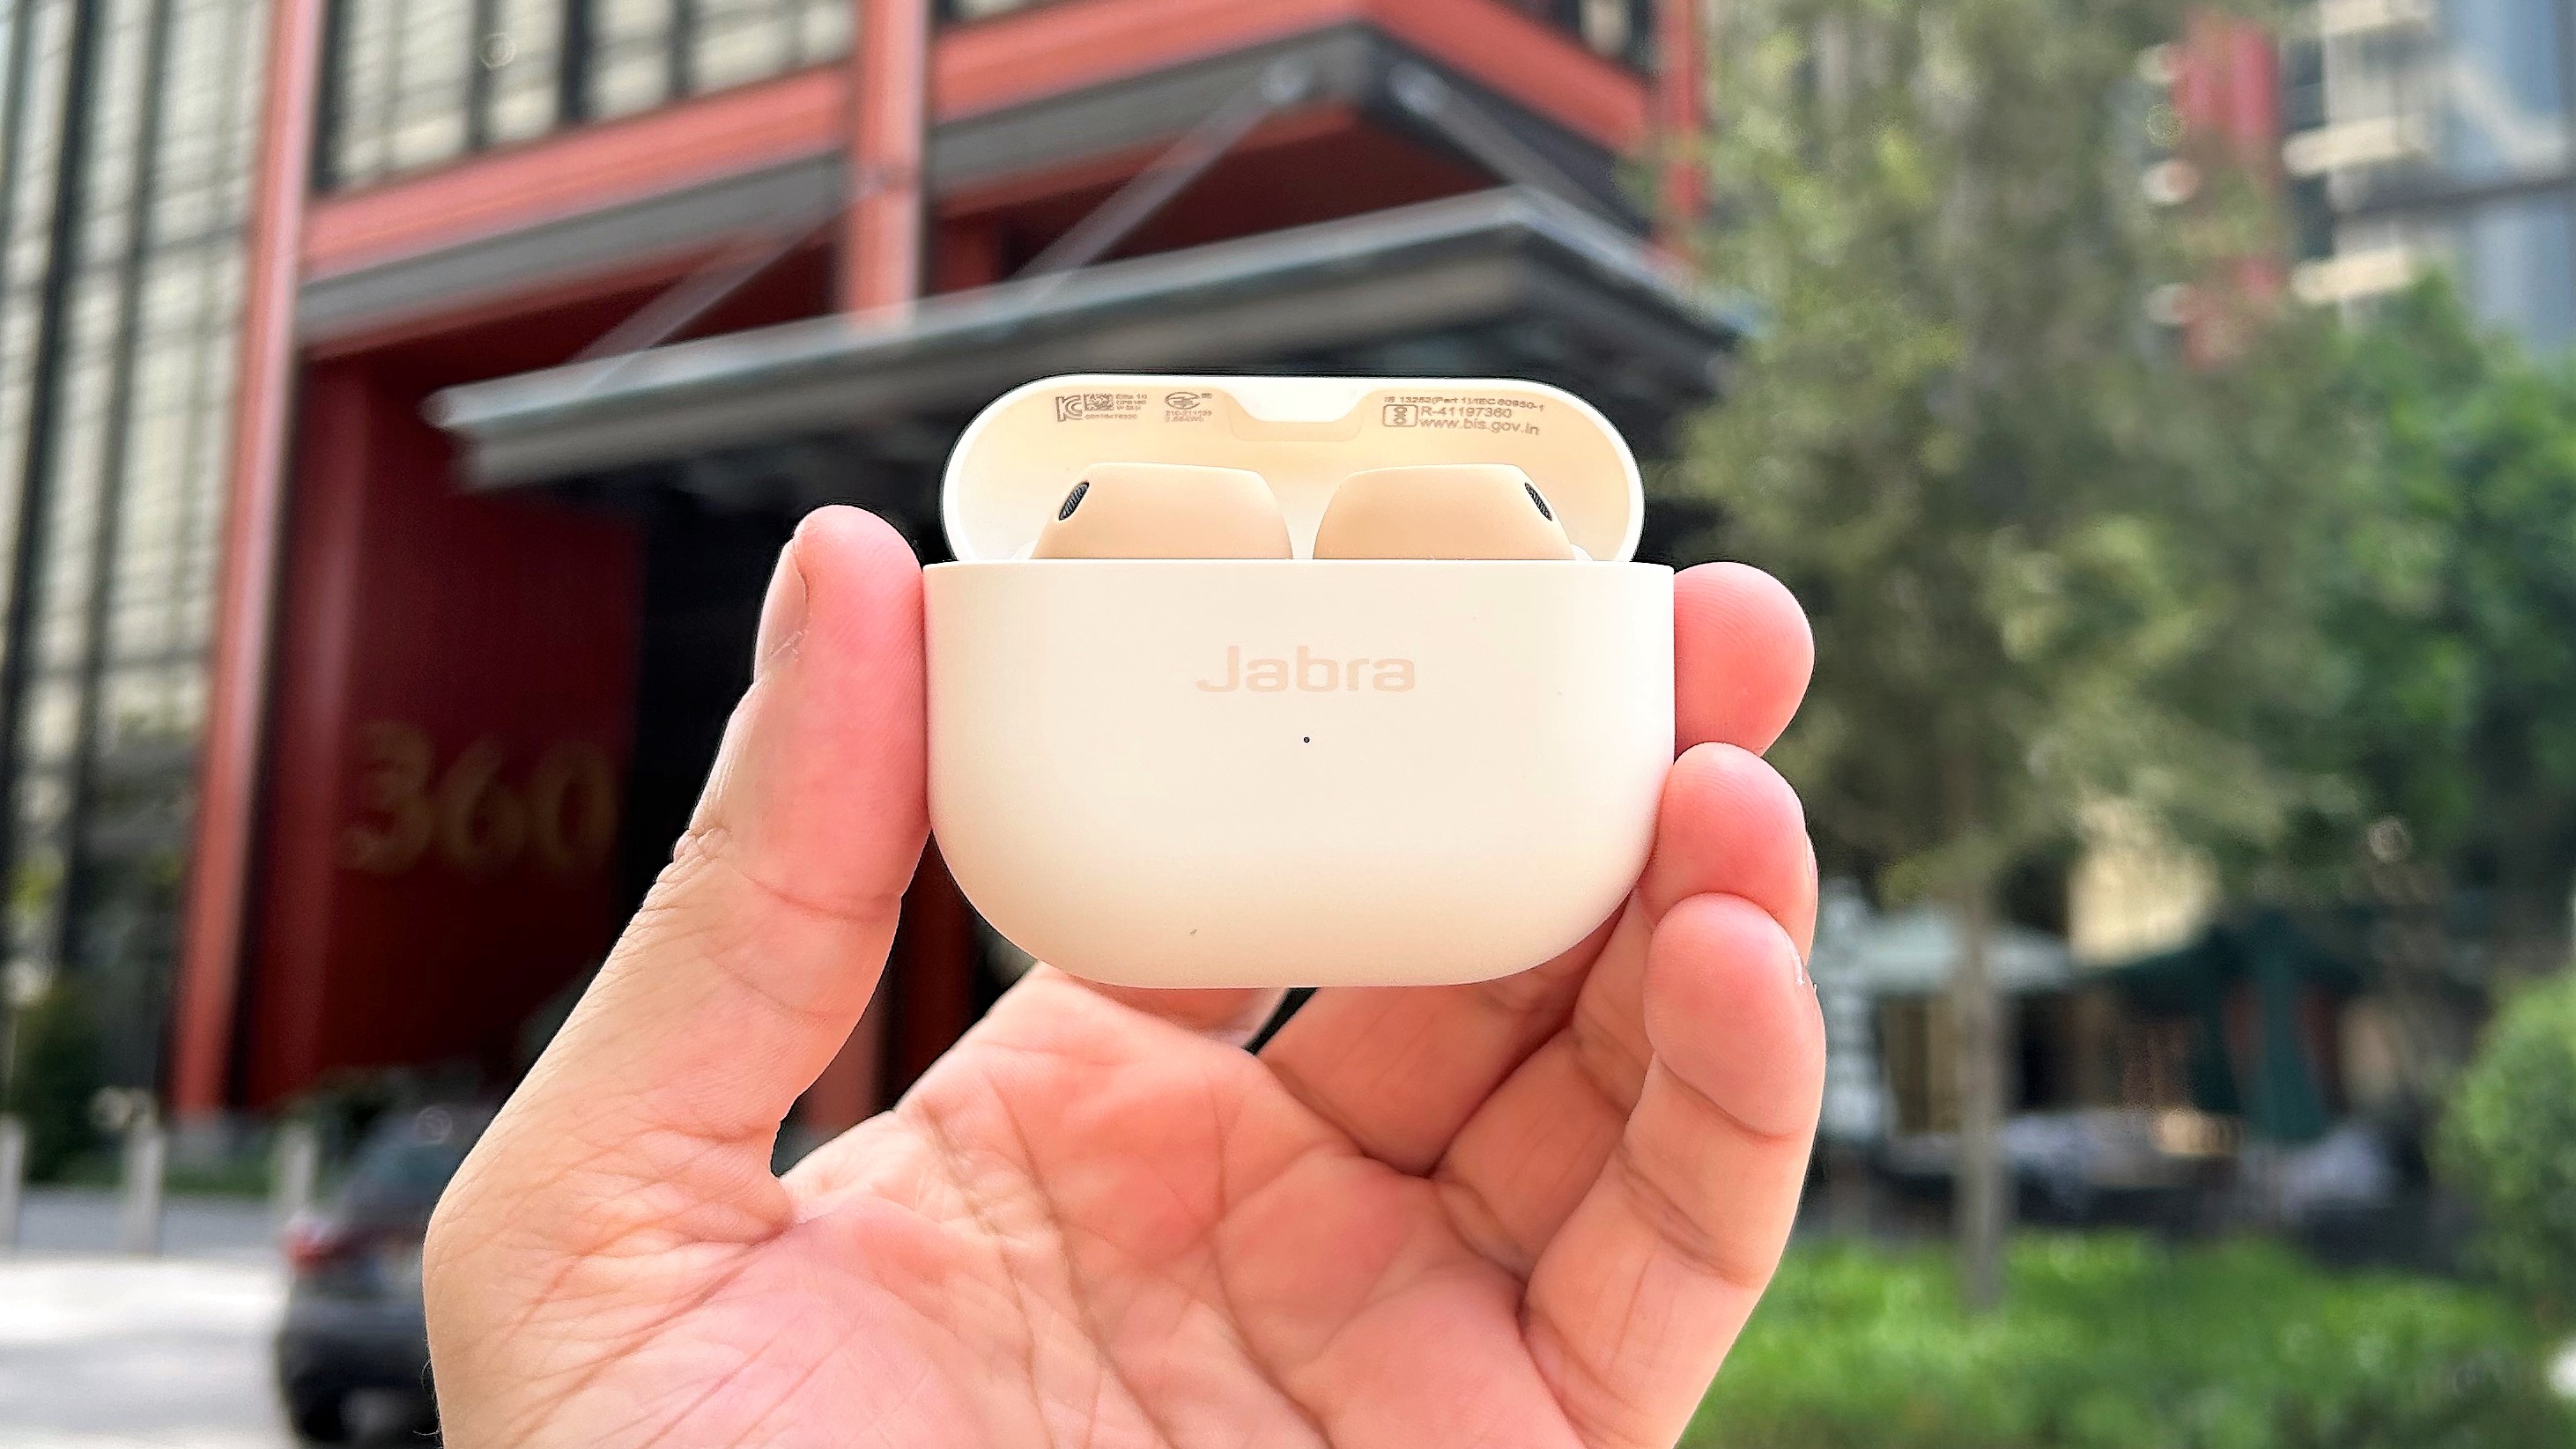 Jabra unveils Dolby Atmos earbuds that rival the AirPods Pro 2 on sound